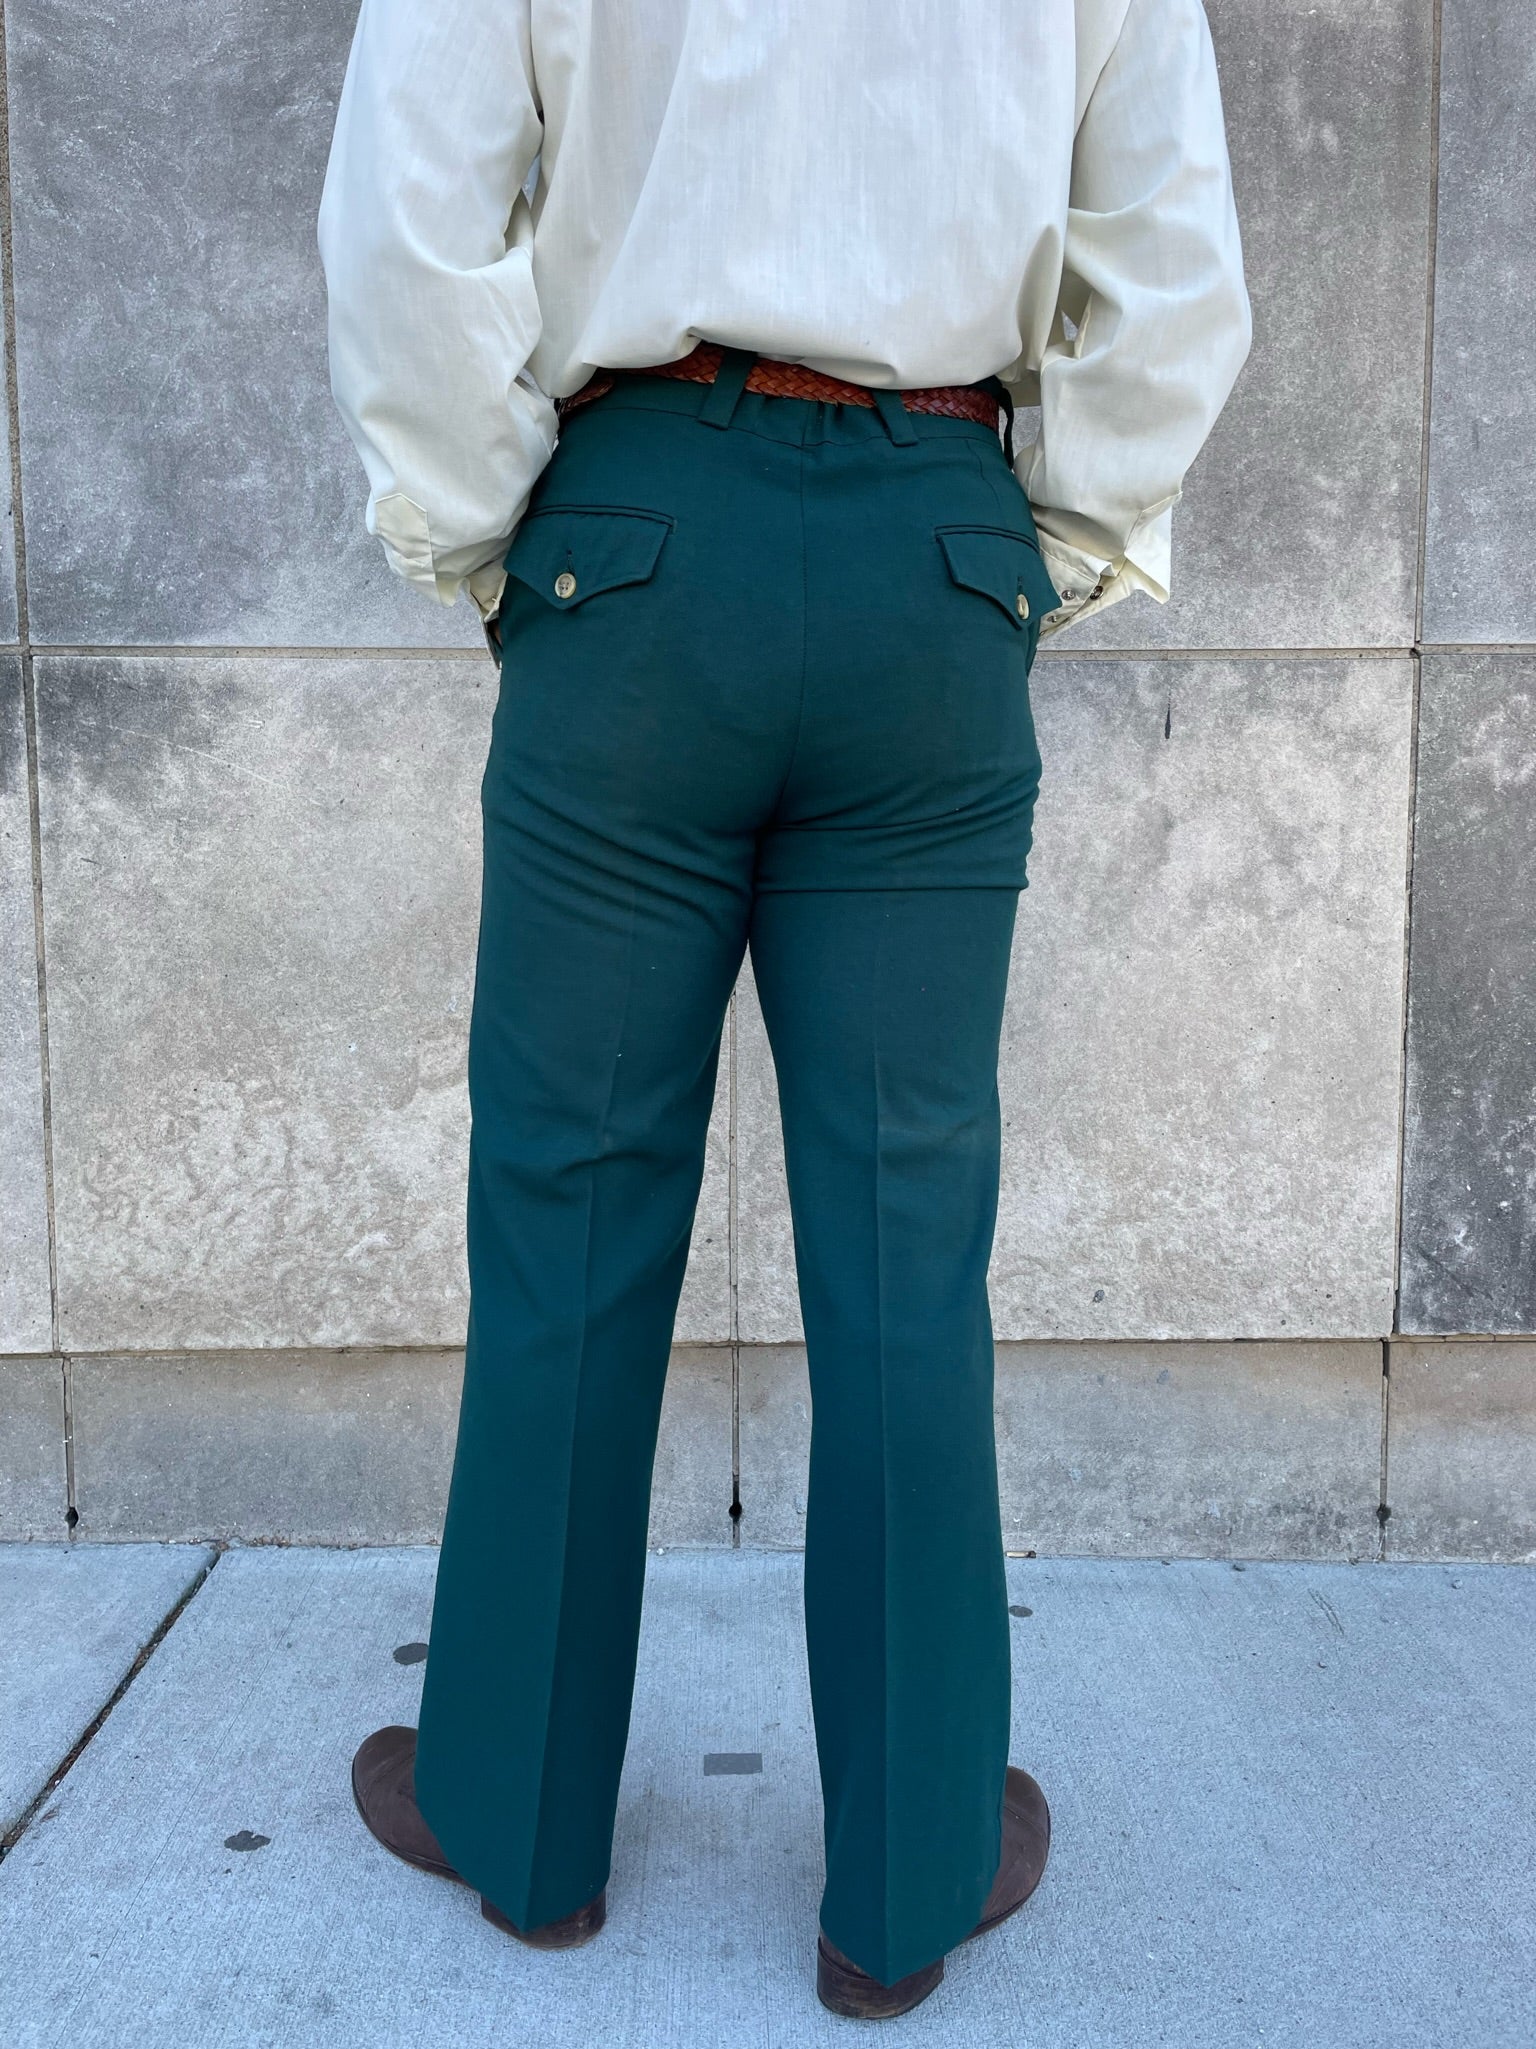 The bell bottom pants became popular in the late 1960s and continued to  widen into the '70s as the… | 70s fashion men, Flare trousers outfit,  Flared trousers outfit